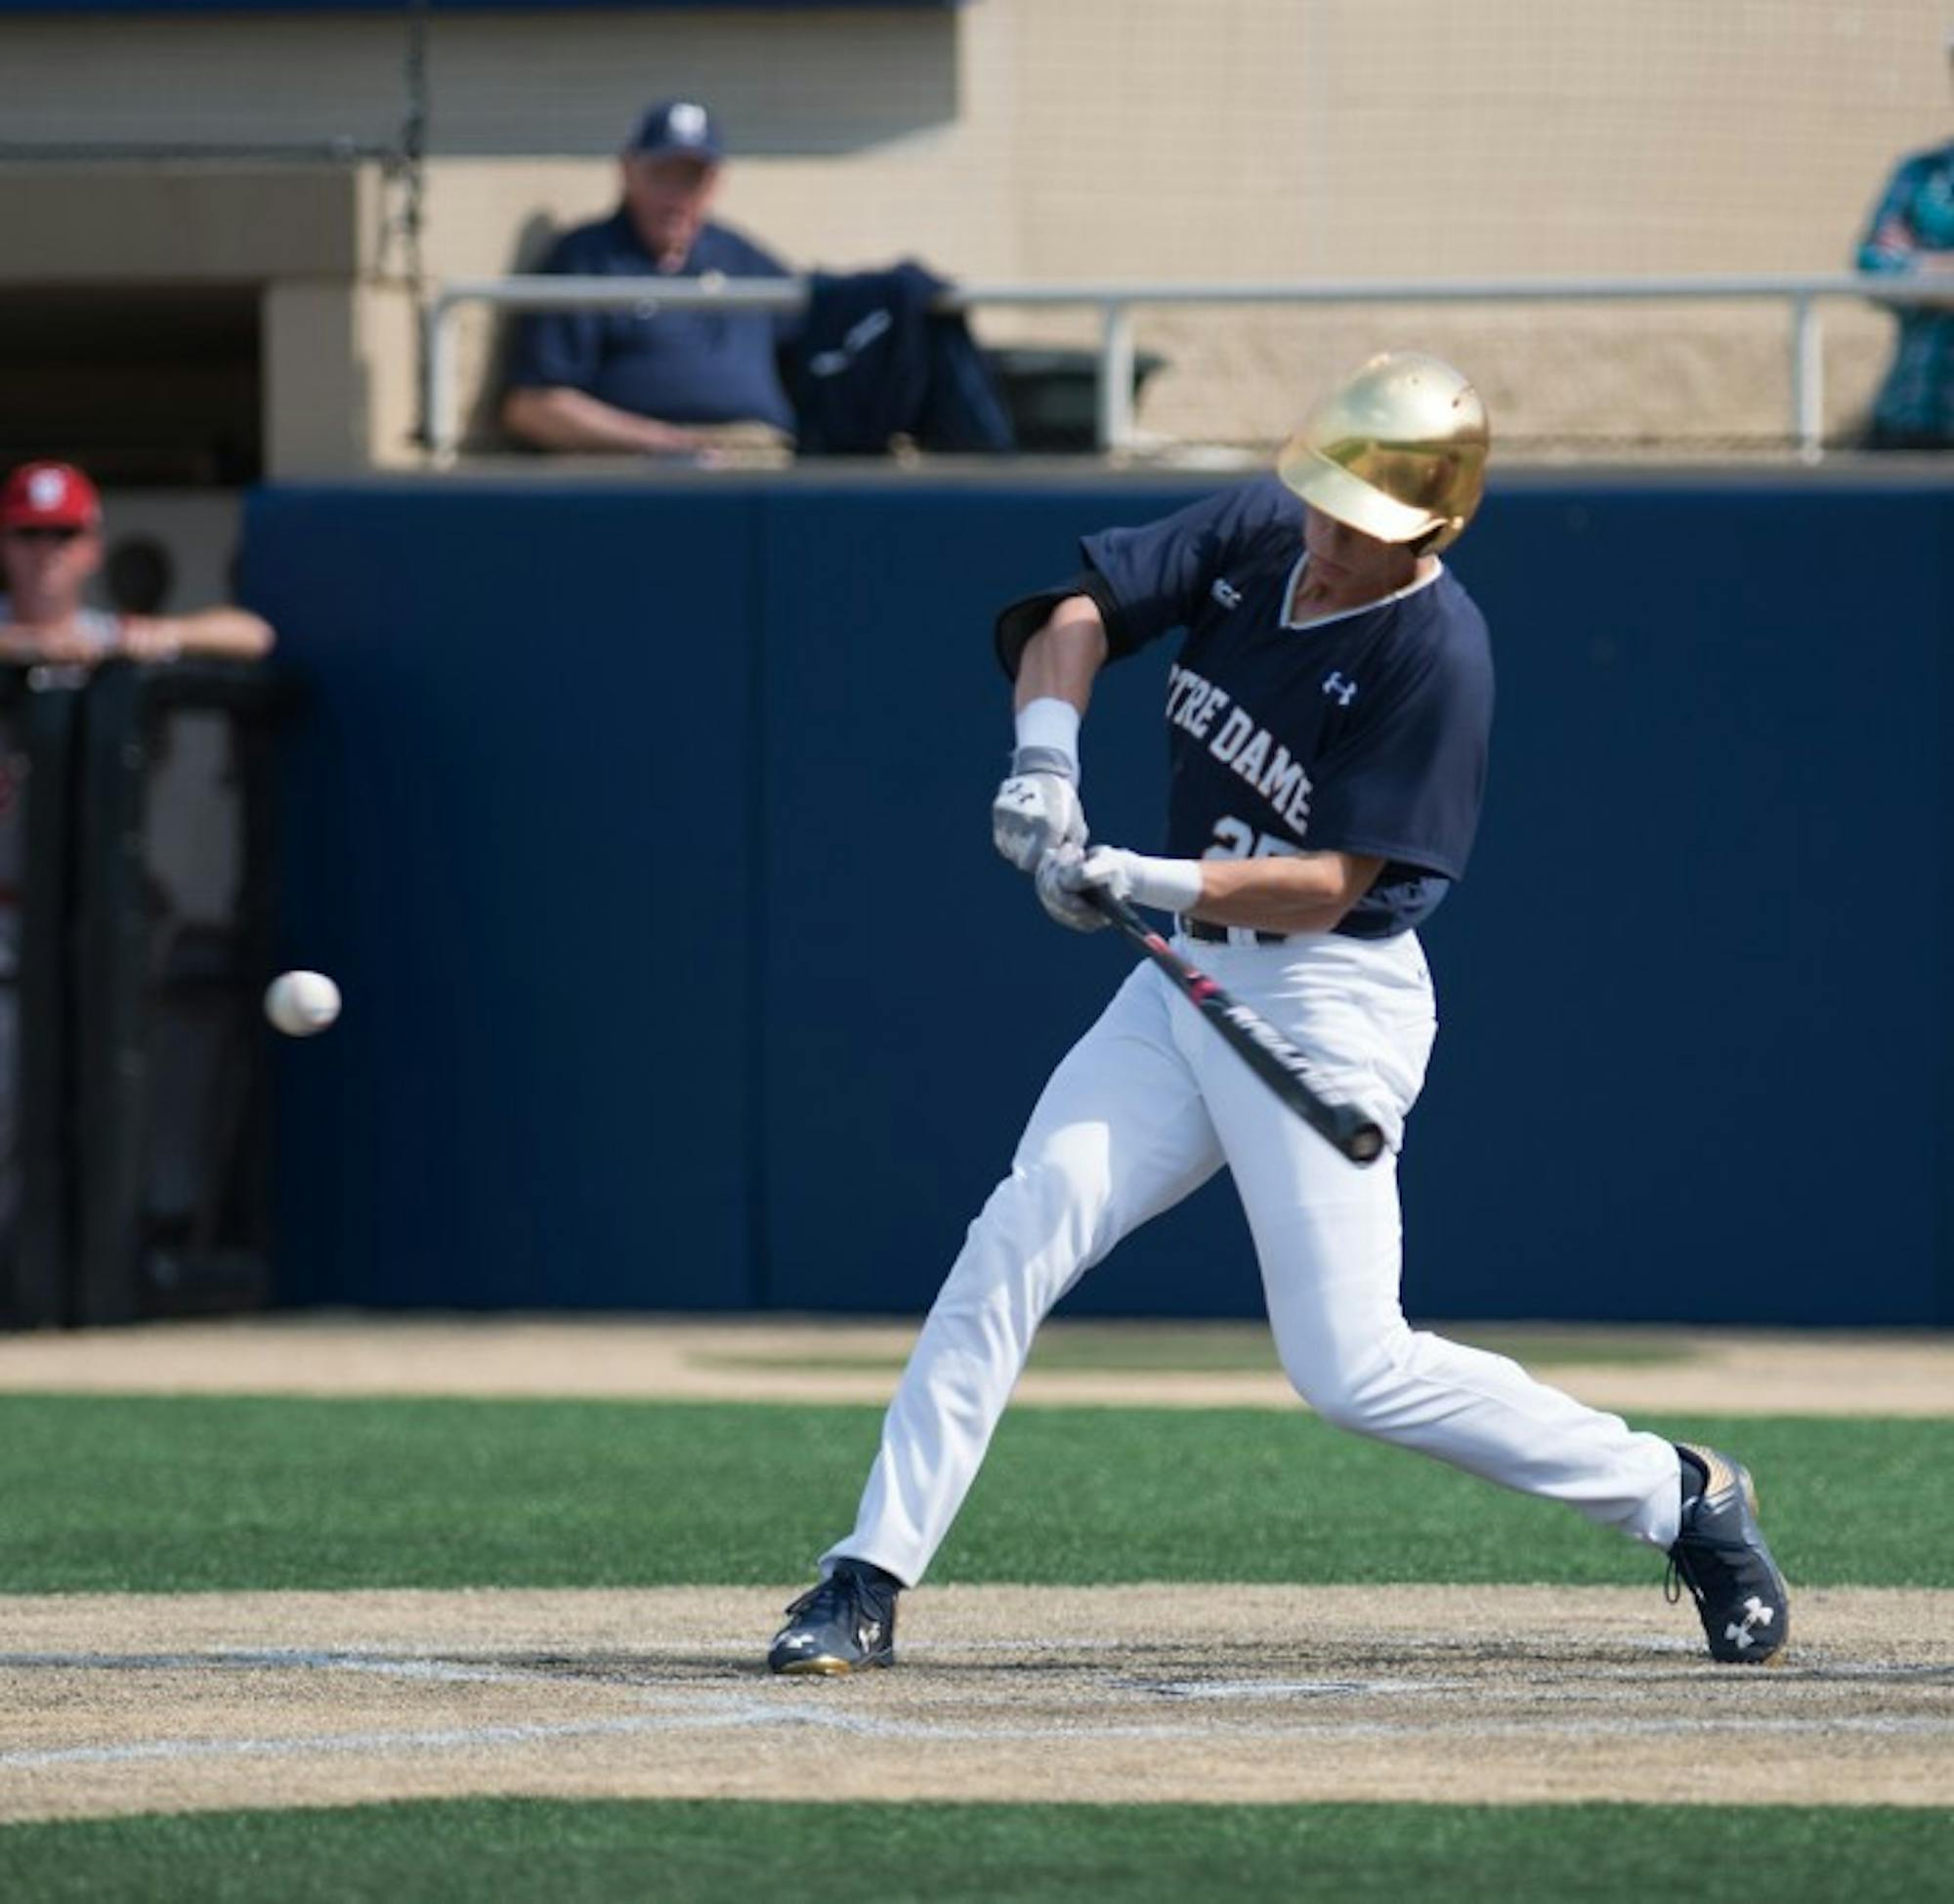 Senior outfielder Robert Youngdahl offers at a pitch Sunday  during Notre Dame’s doubleheader against North Carolina State.